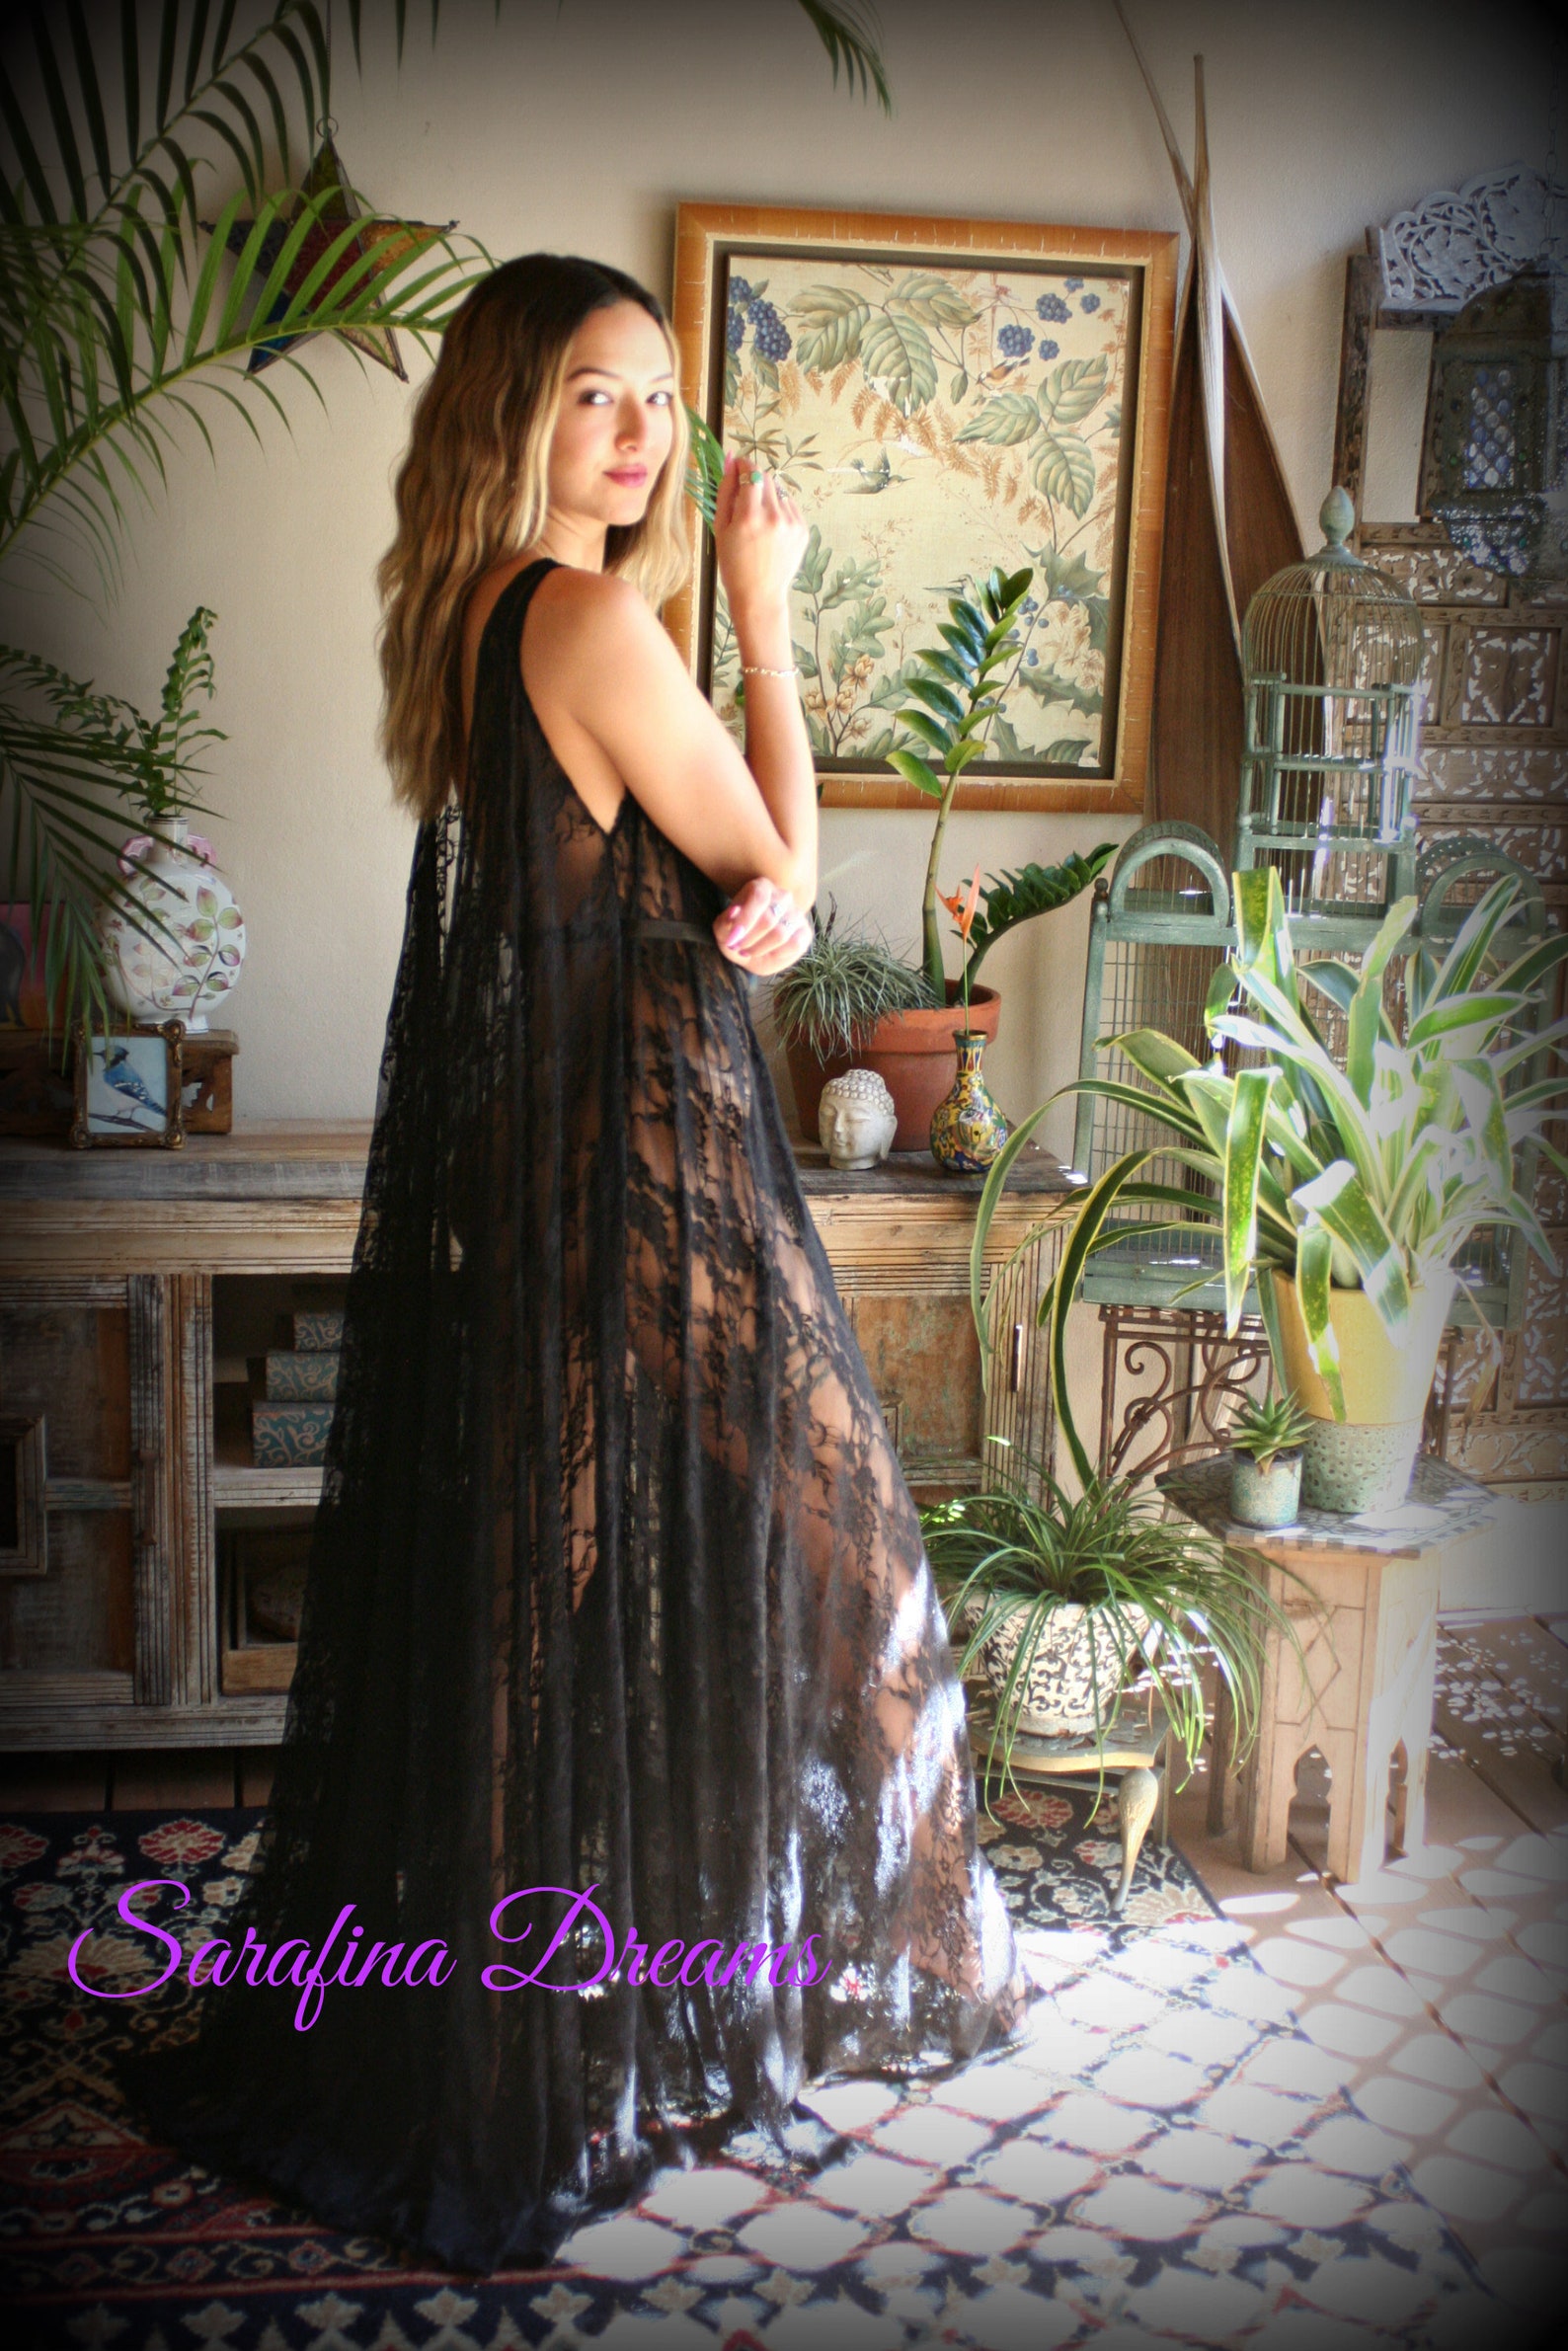 Black Lace Backless Nightgown Lace Lingerie Black Lace - Etsy